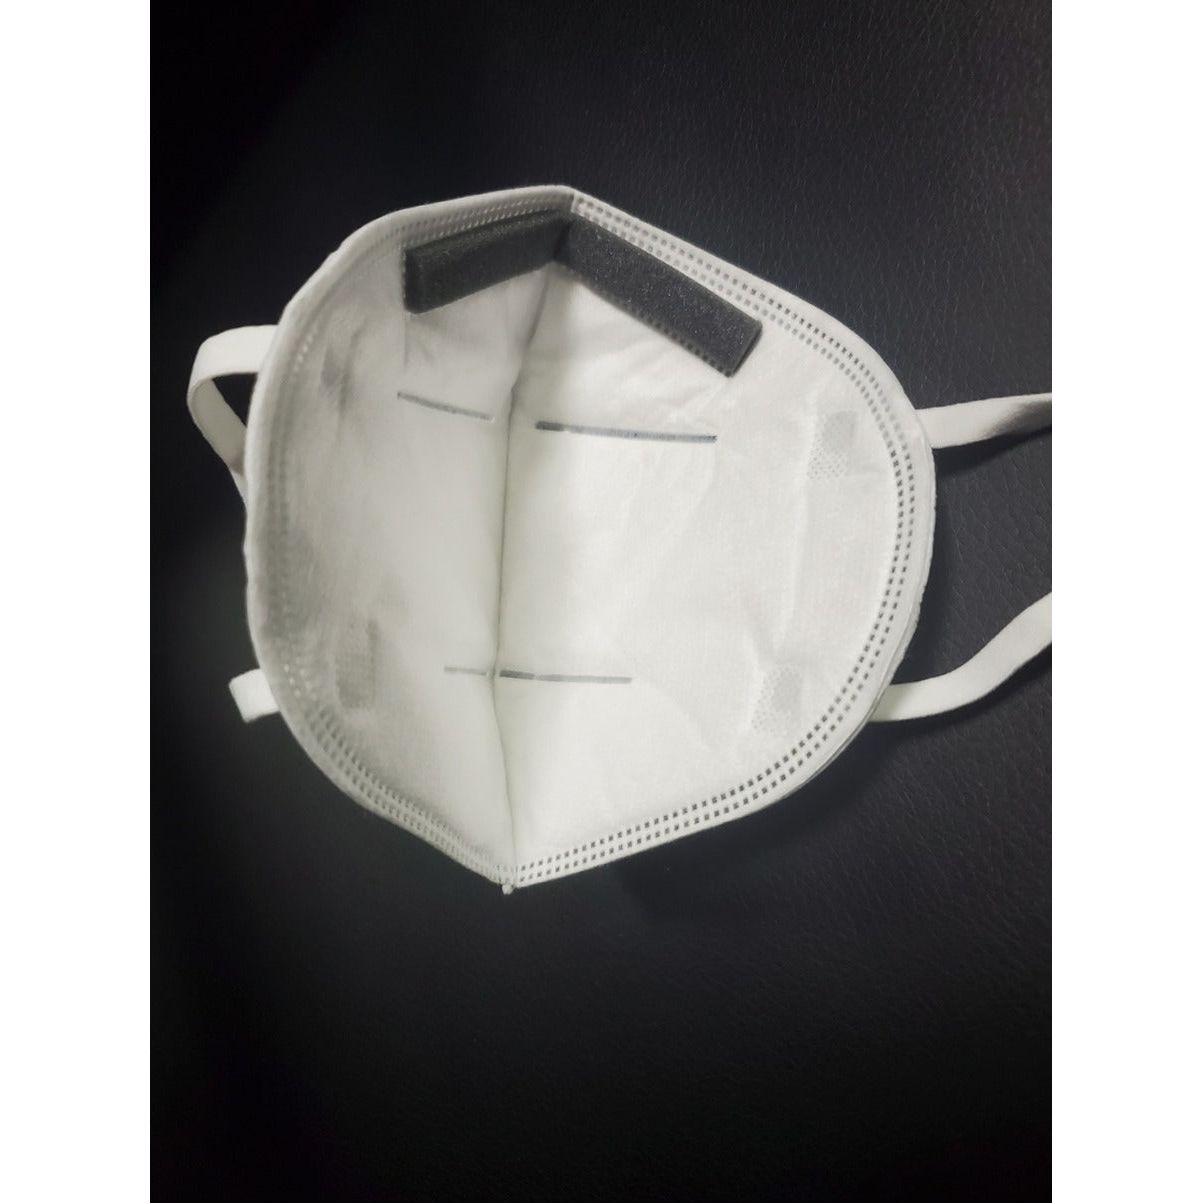 Inside view of white Powecom KN95 face mask with padding for nose